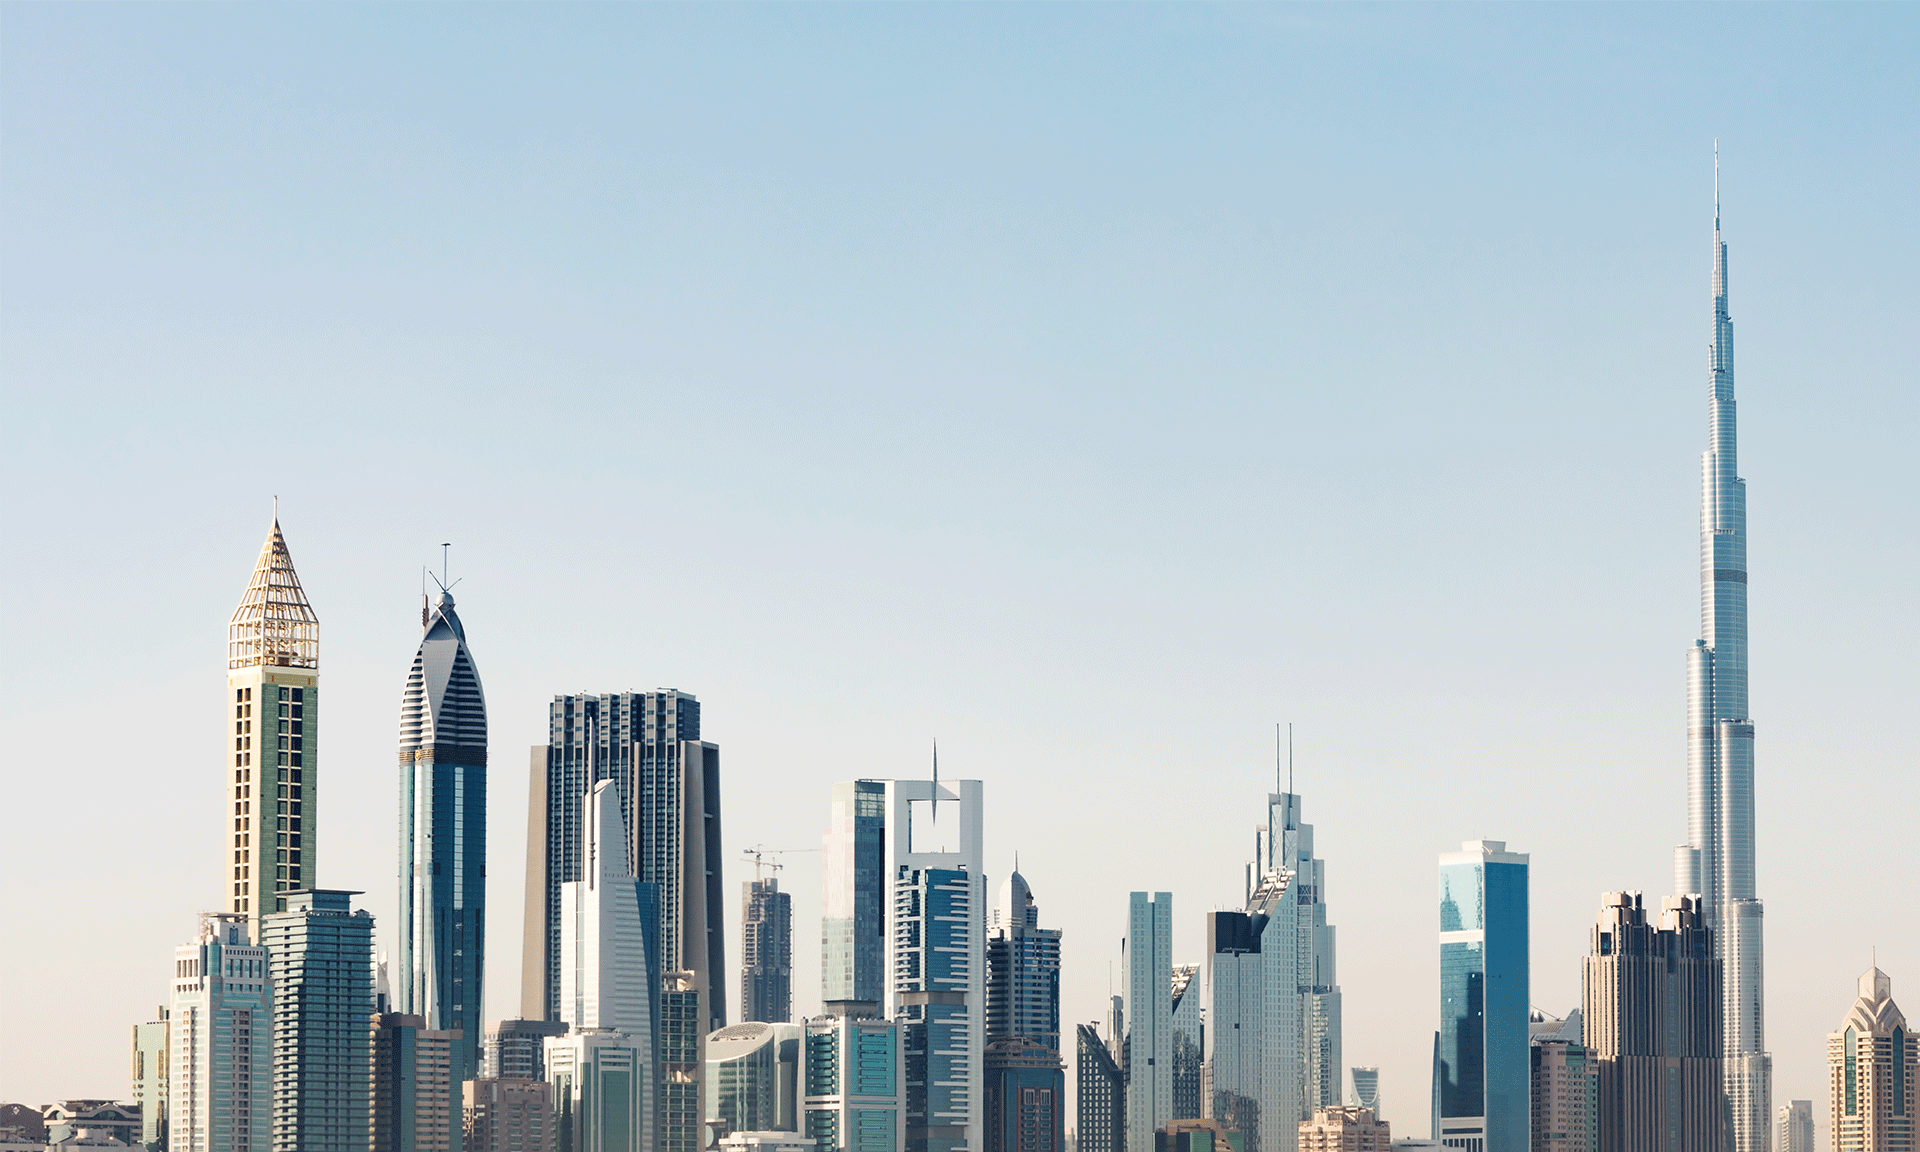 Dubai and UAE are the Front Runners in Attracting Foreign Direct Investment in MENA Region